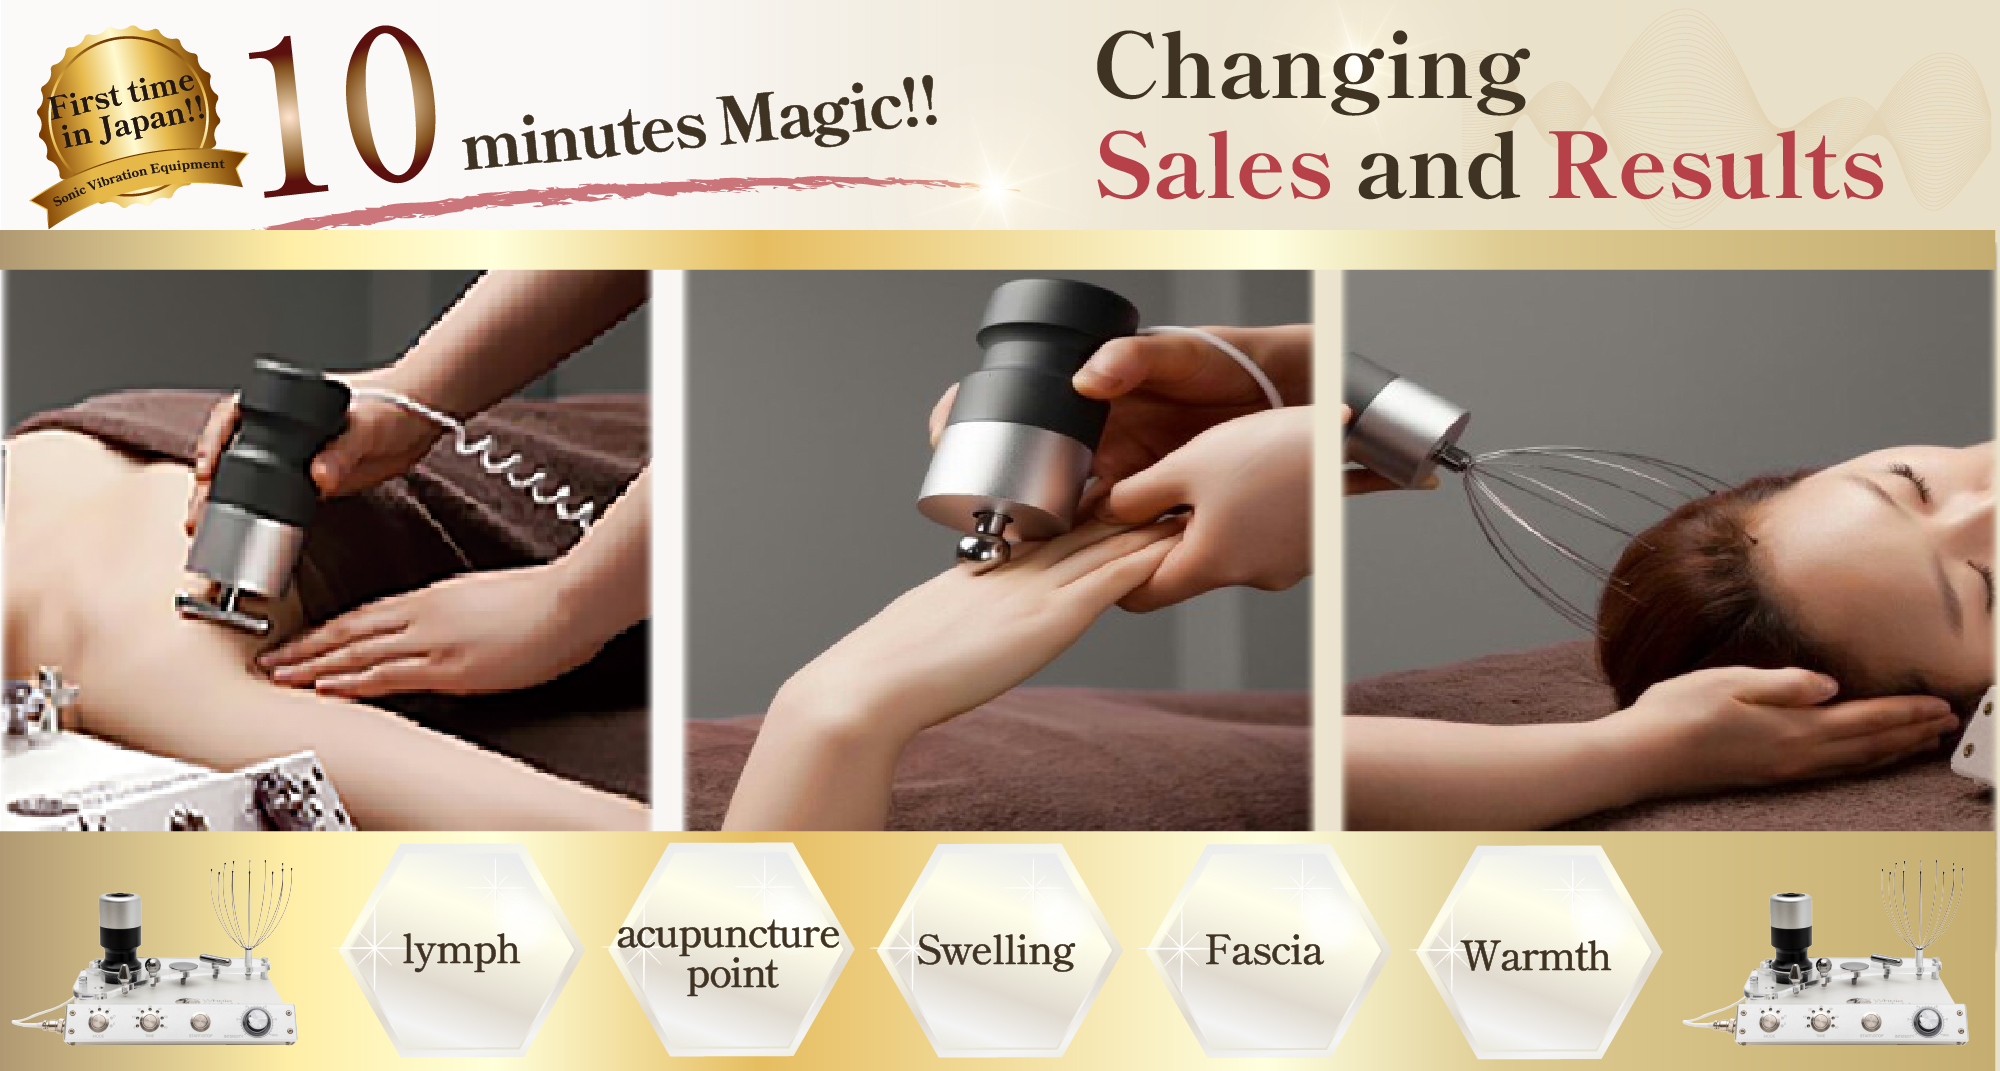 10 minutes Magic!! Changing Sales and Results